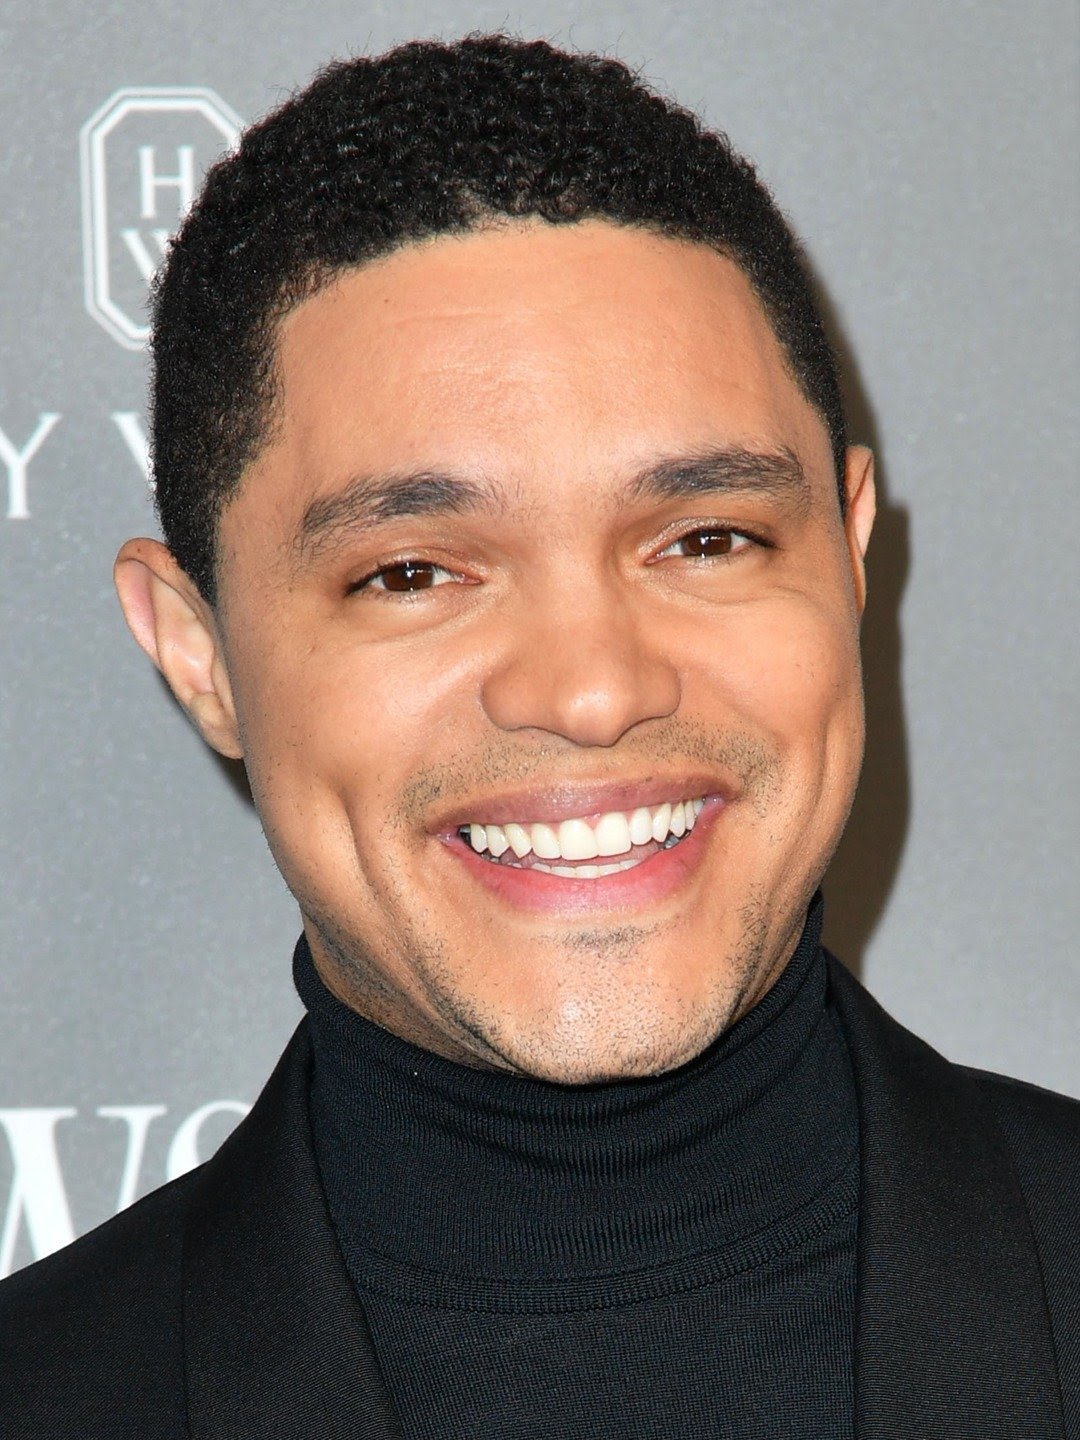 Barack Obama tells Trevor Noah that young people have “better things to do” than vote